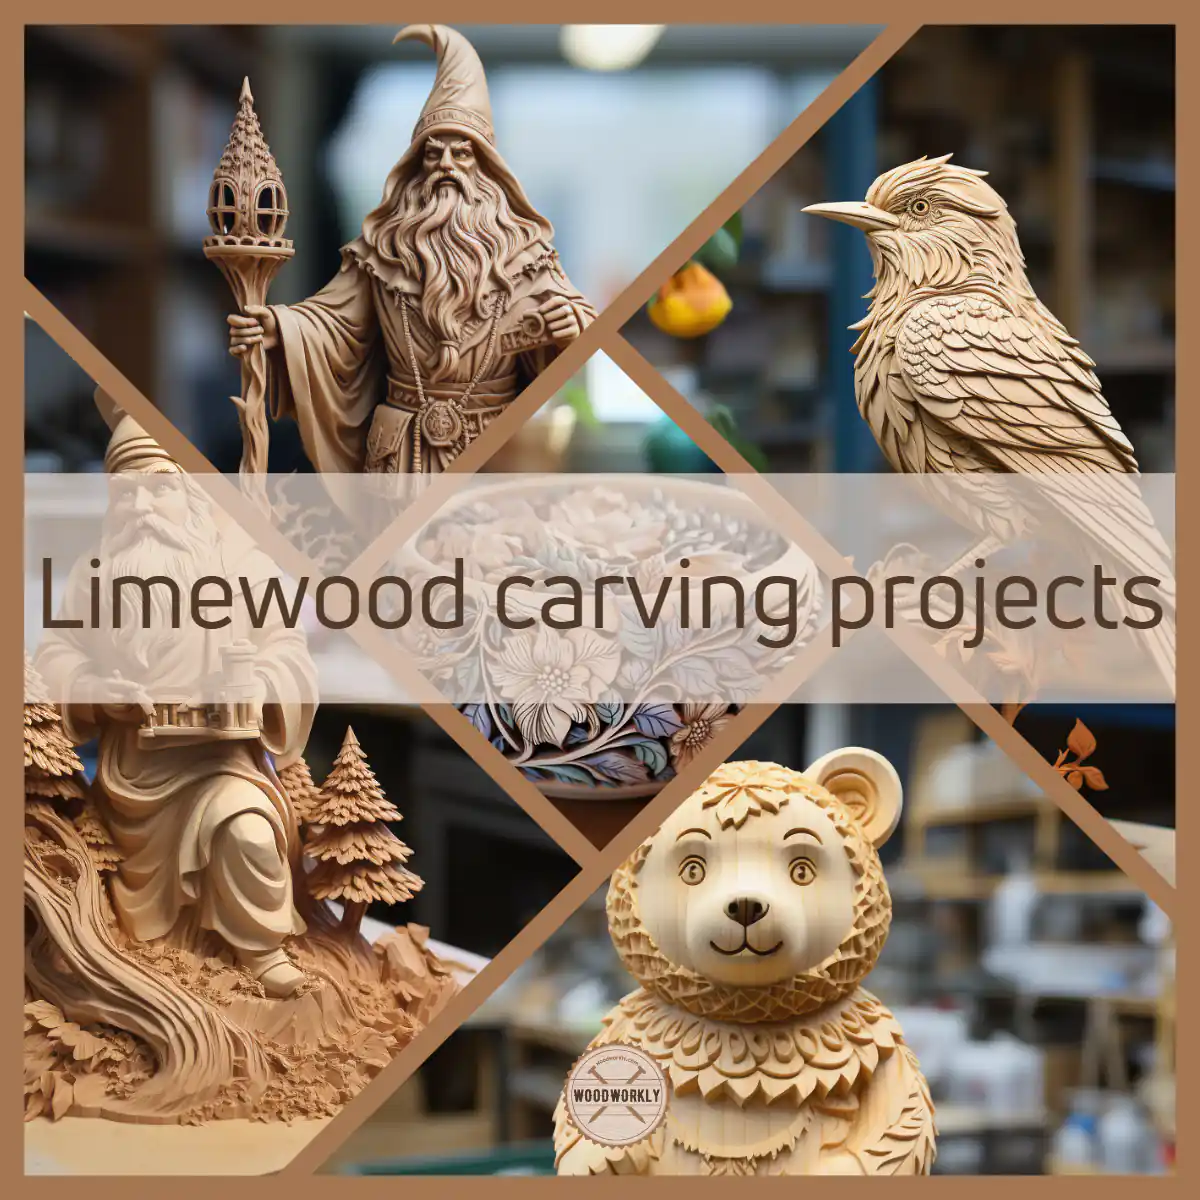 Limewood carving projects